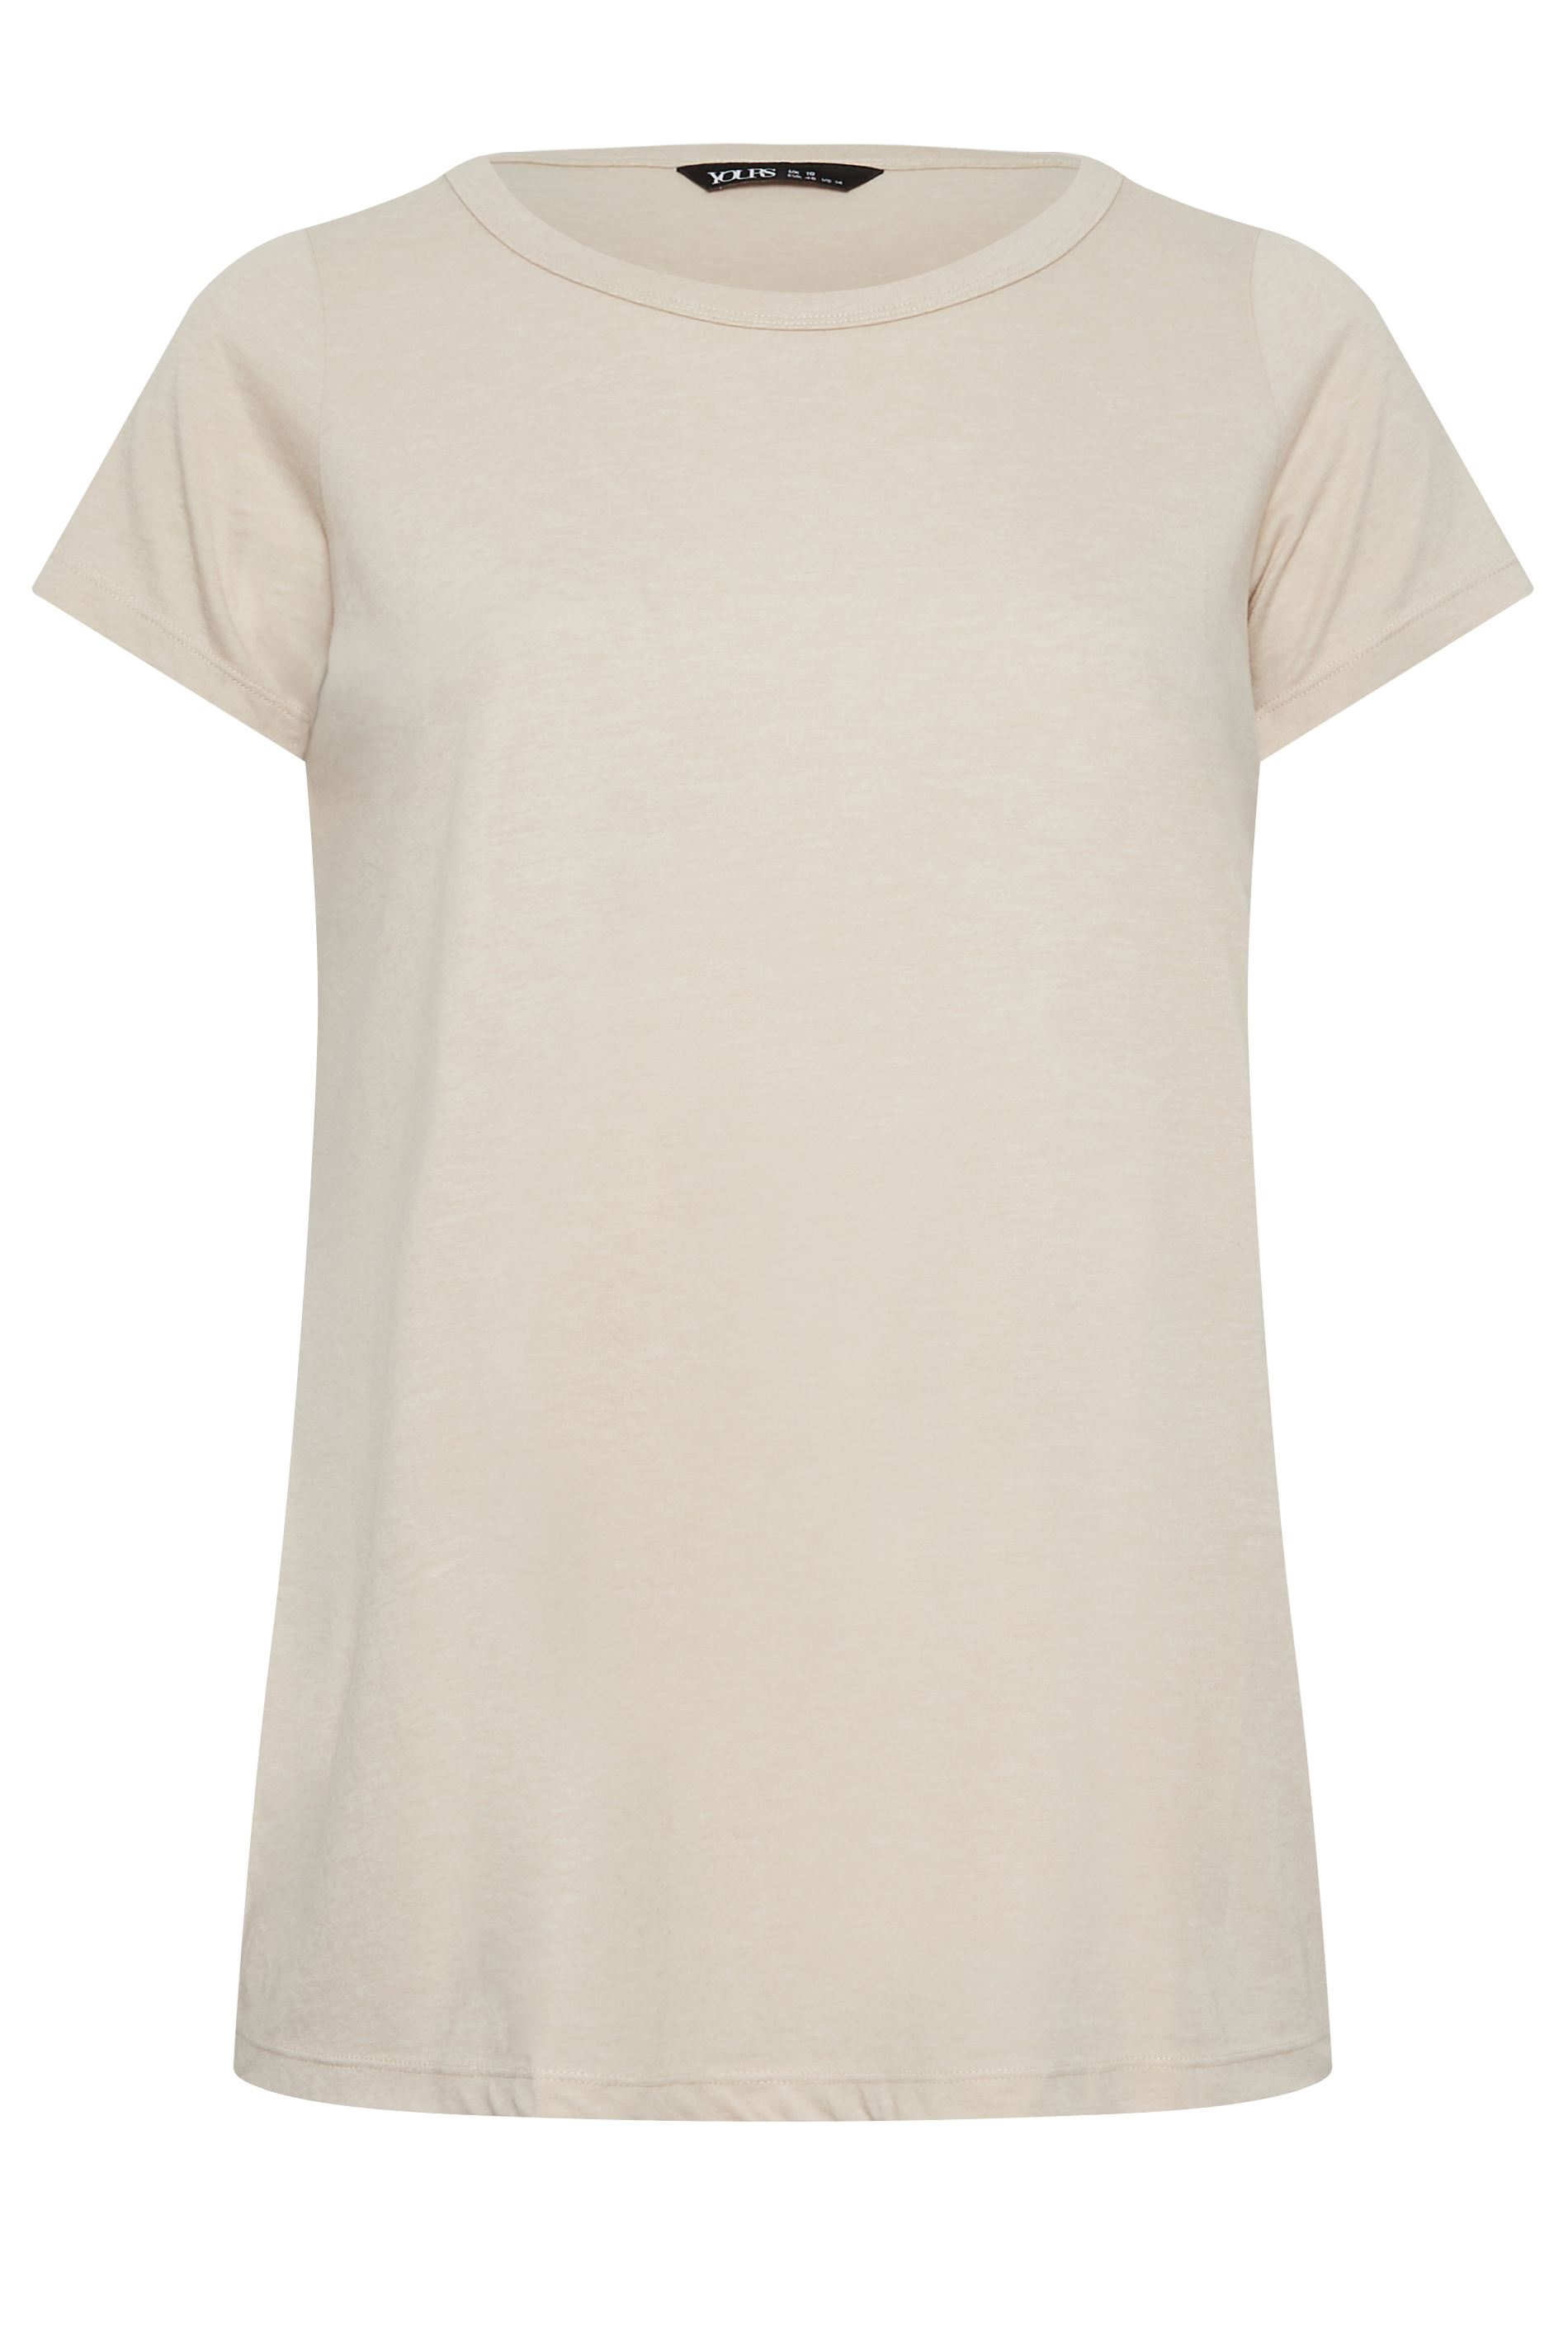 YOURS Curve Plus Size Beige Brown Essential T-Shirt